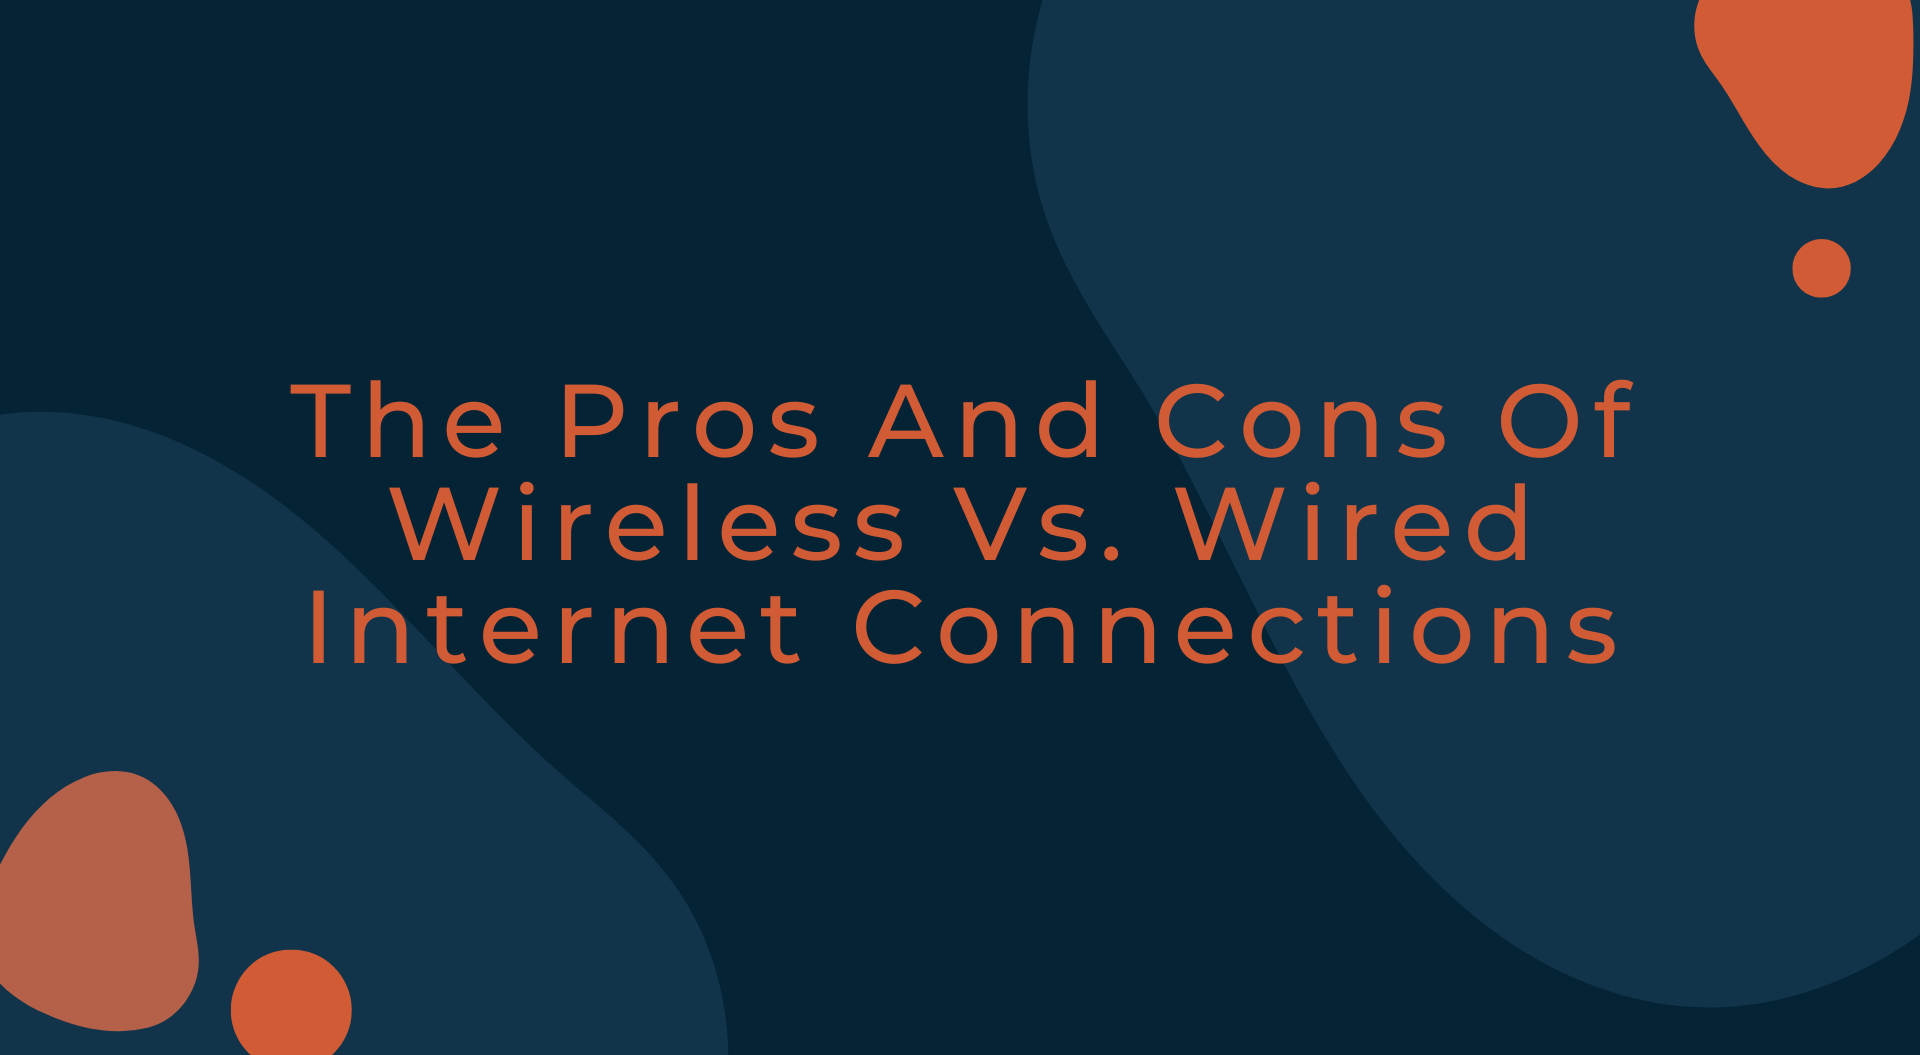 The Pros And Cons Of Wireless Vs. Wired Internet Connections